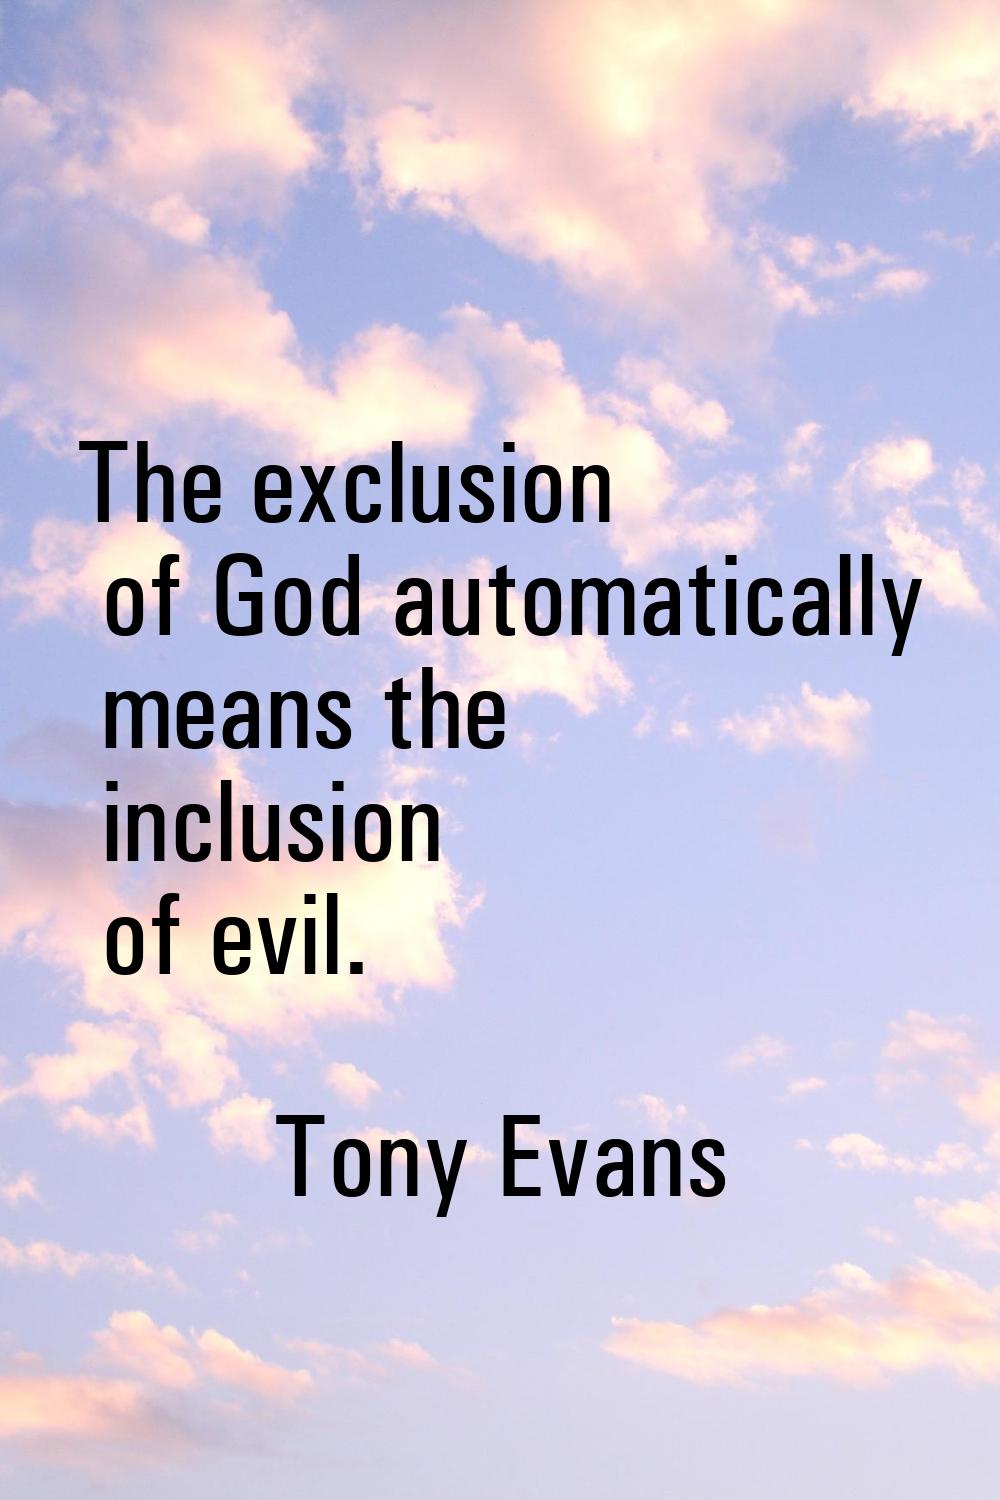 The exclusion of God automatically means the inclusion of evil.